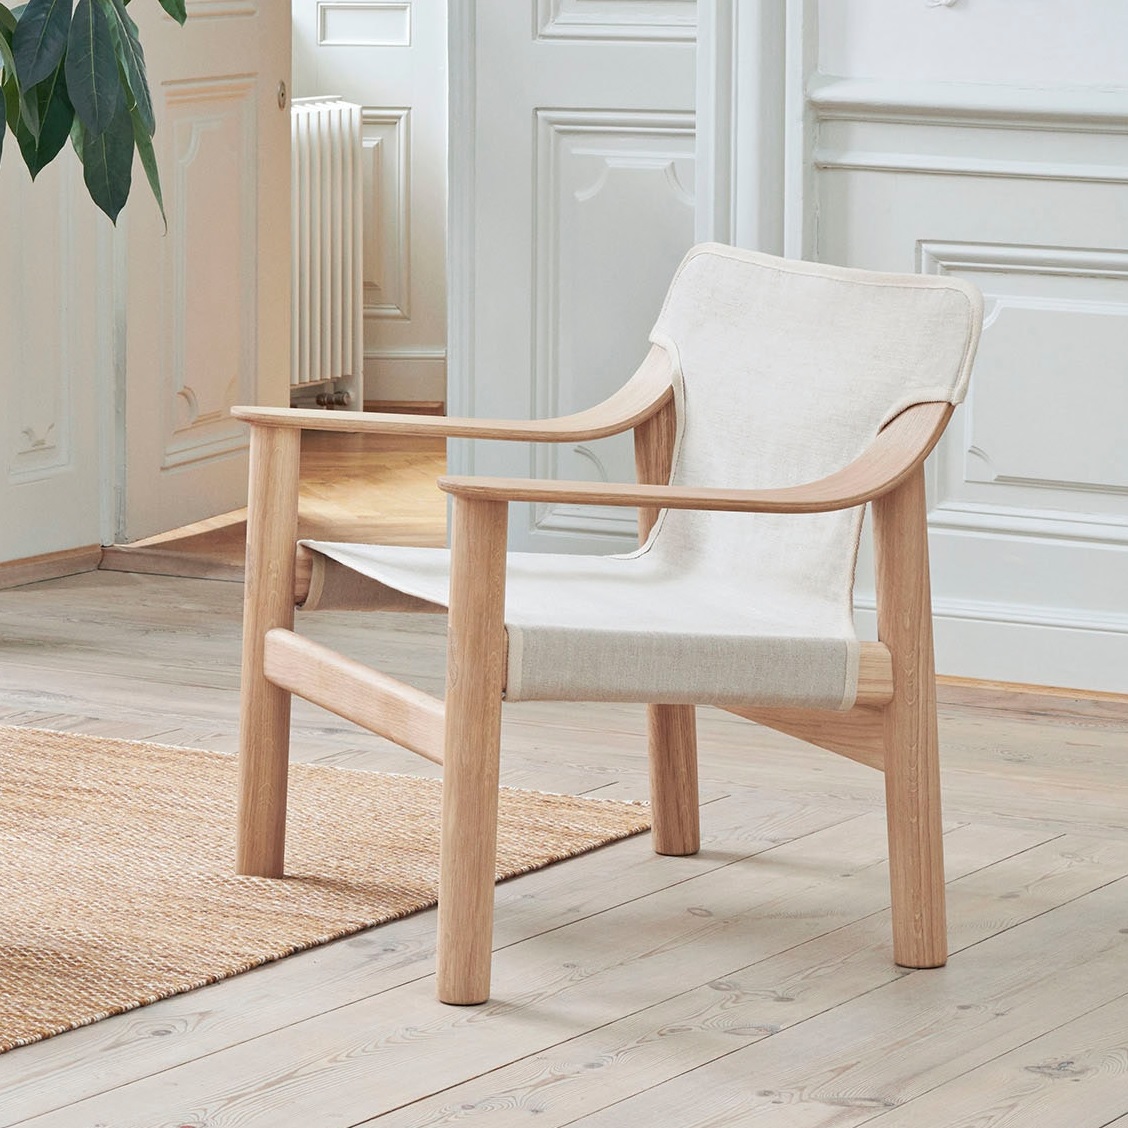 51 Wooden Chairs for Every Room in the Home